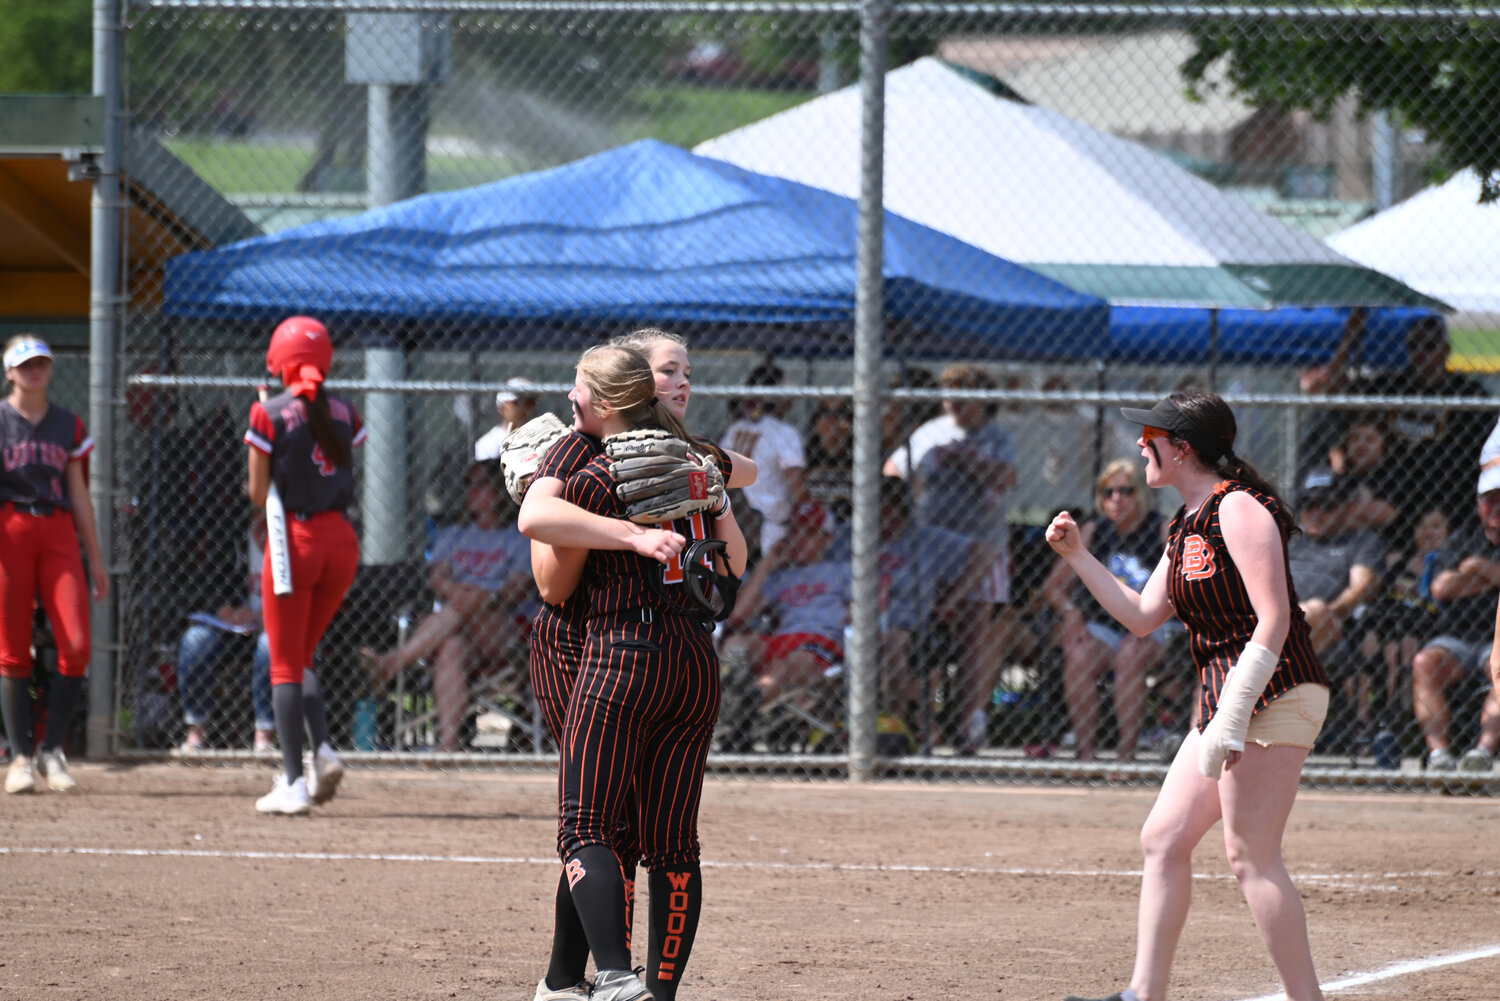 Blaine beat Riverside 3-1 in the quarterfinals of the 1A softball state championships in Richland on May 26.